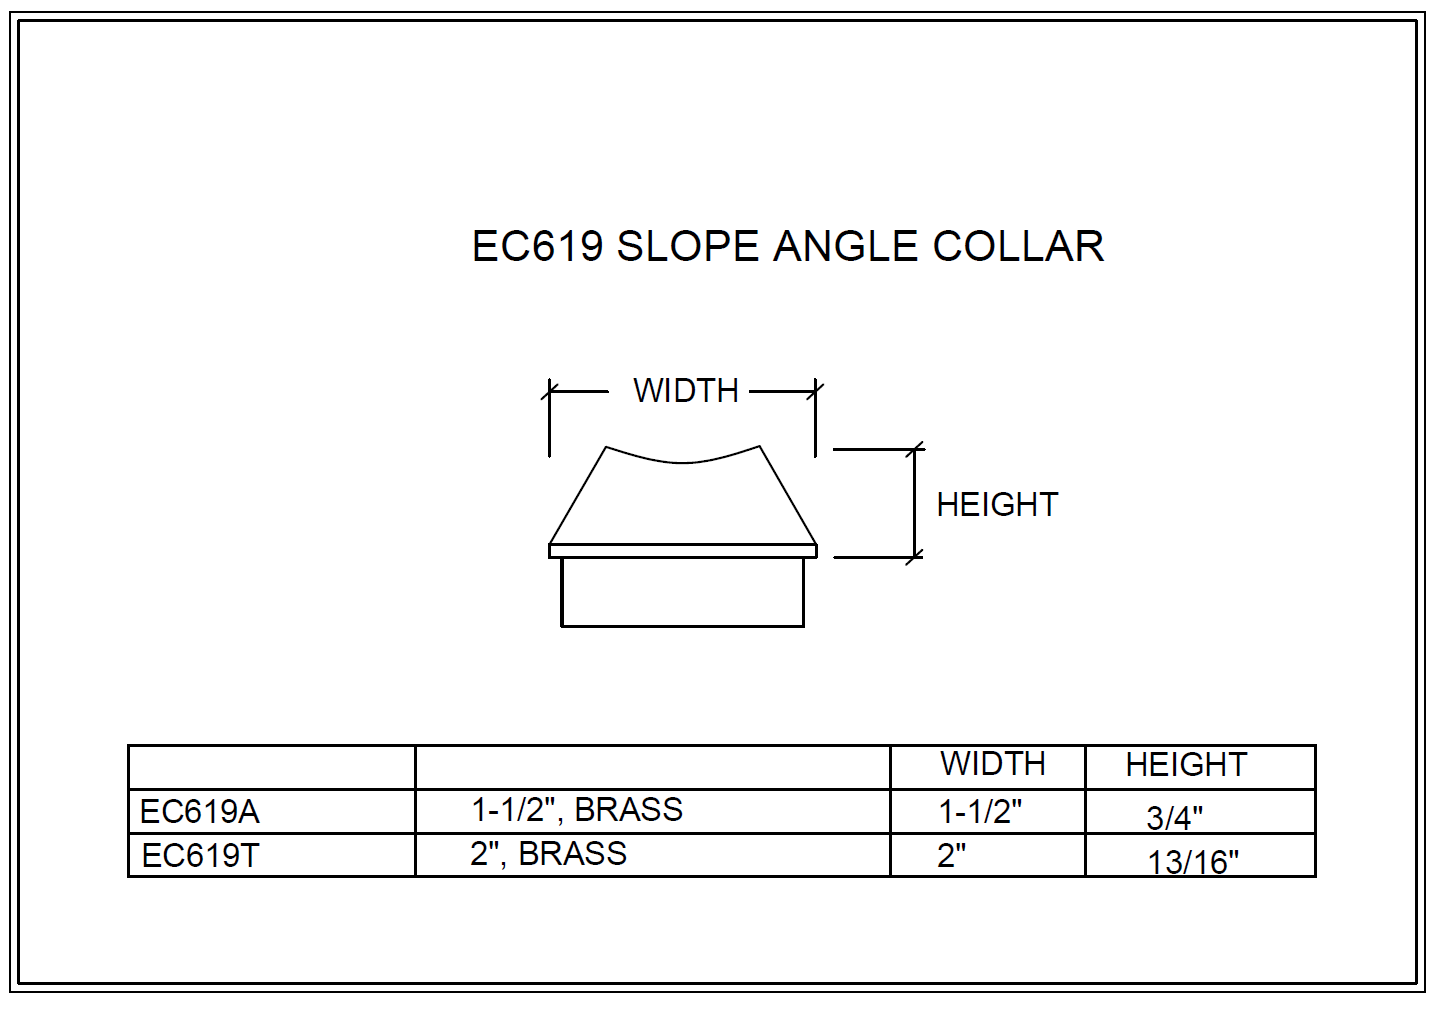 Slope Angle Collar 2" - All finishes